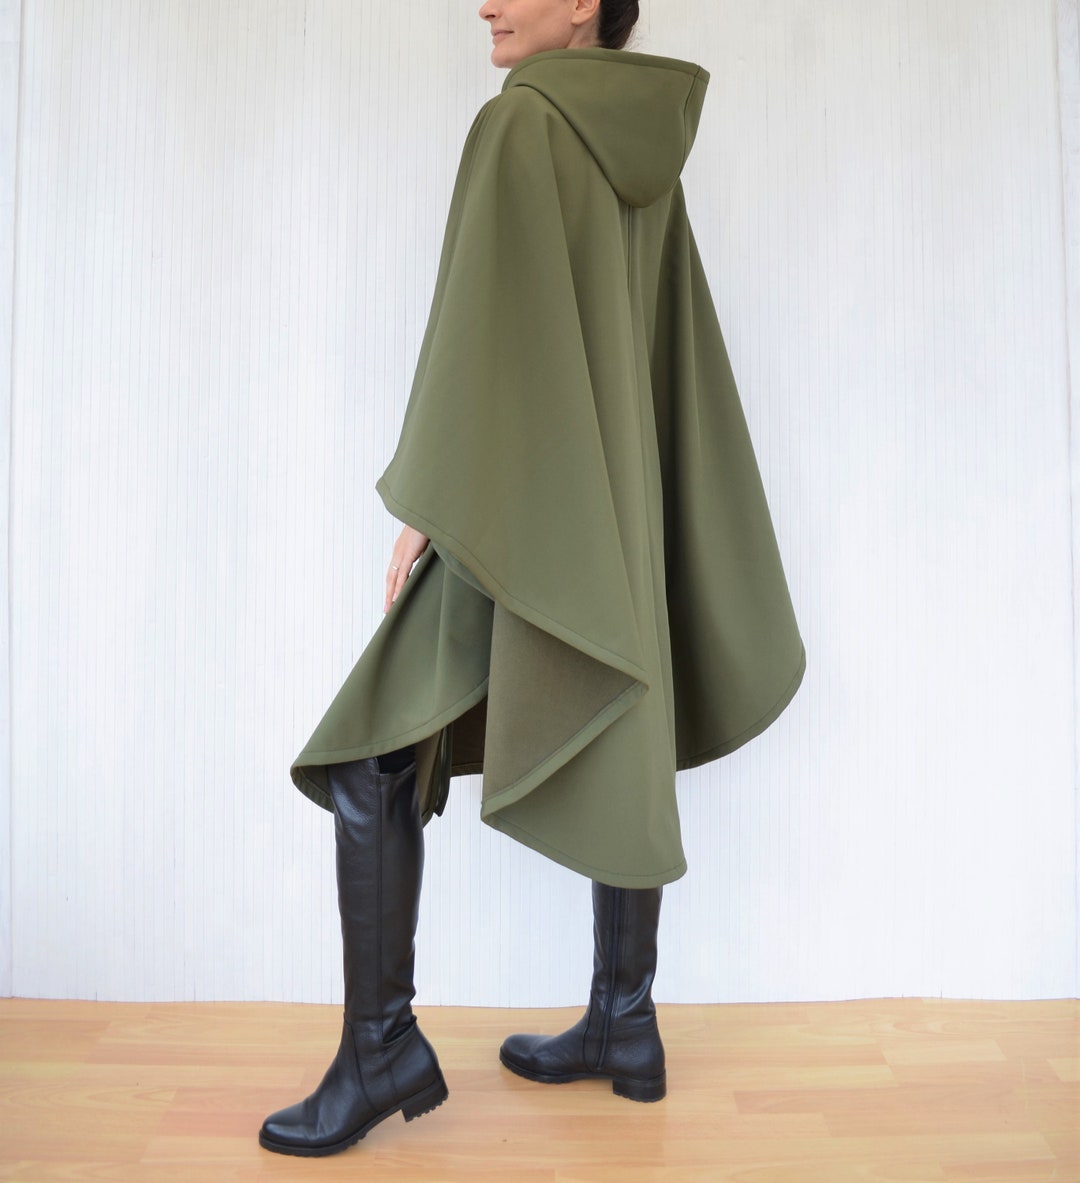 Waterproof and Windproof Cape Coat Green or Black Hooded 